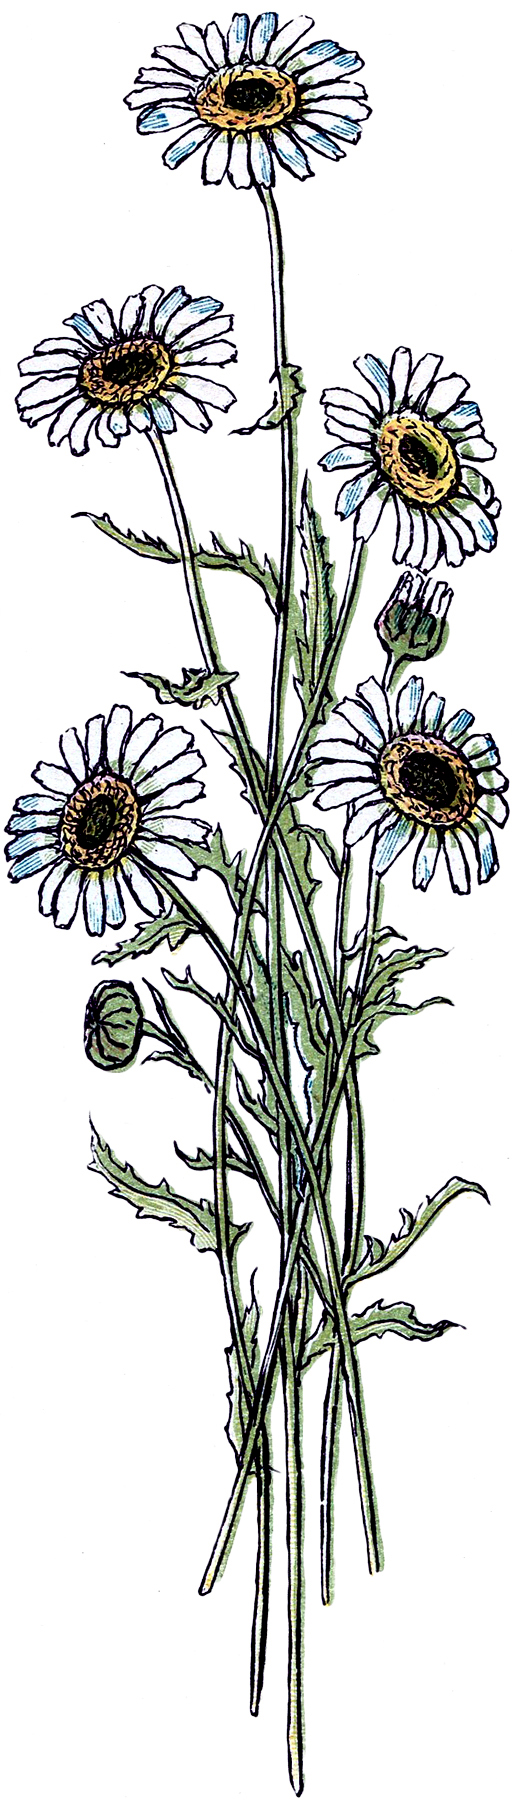 Daisy Flower Drawing Image